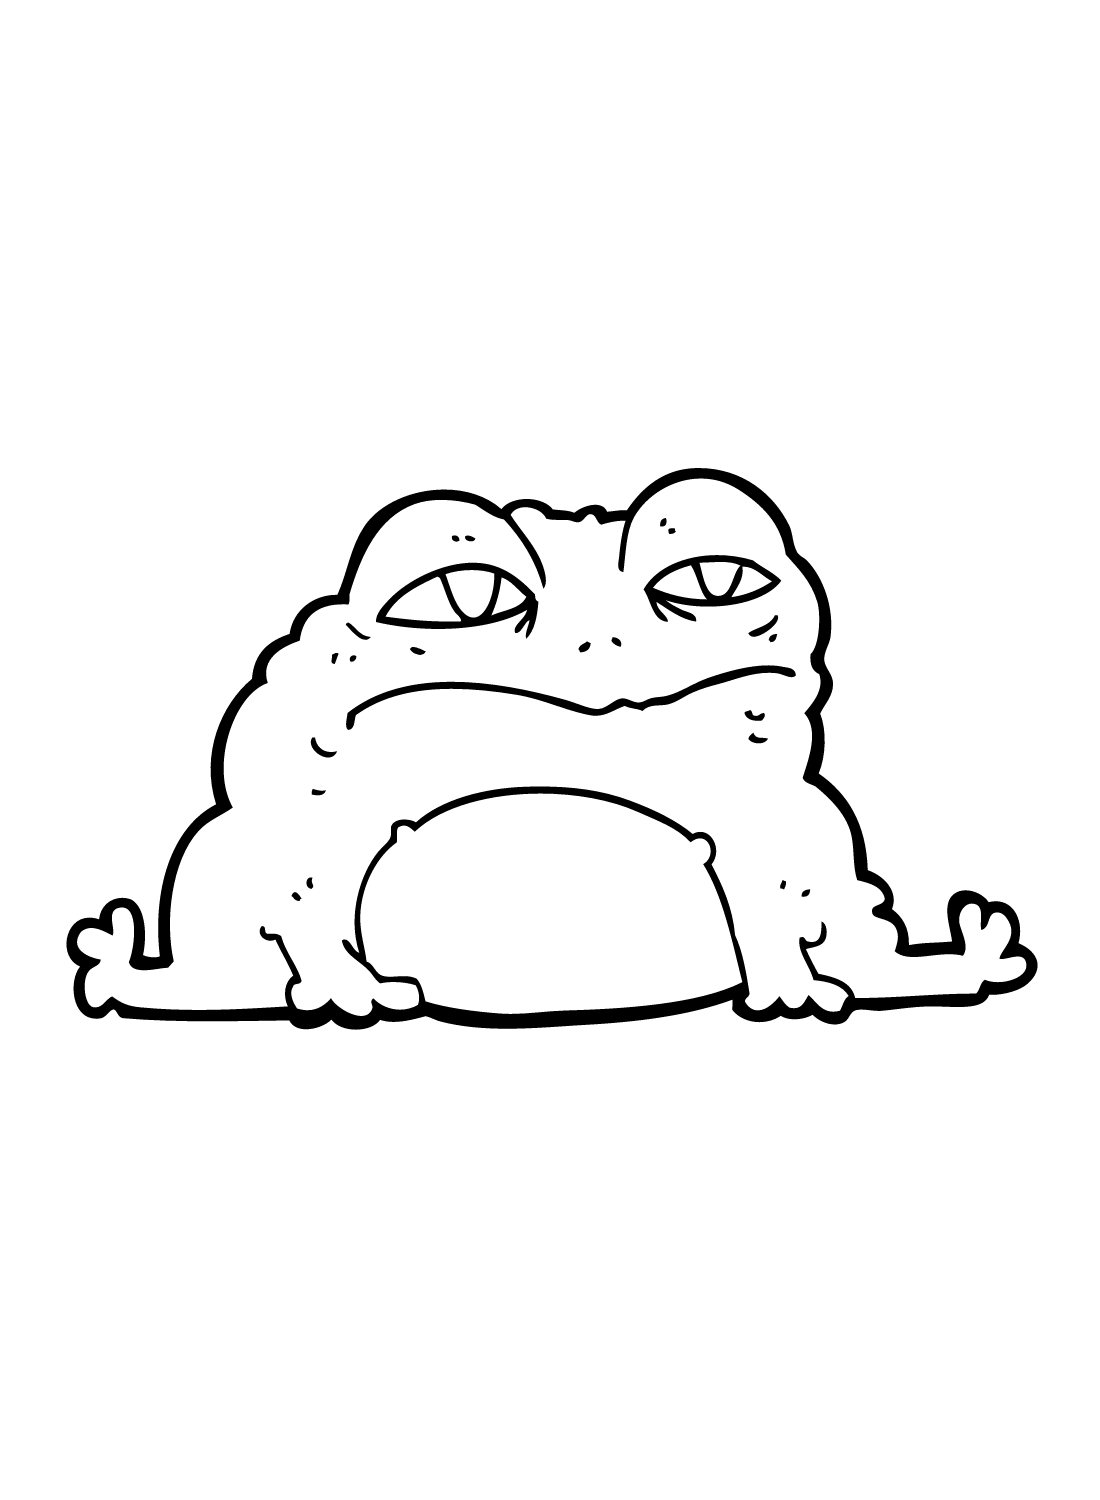 Cute Toad from Toad